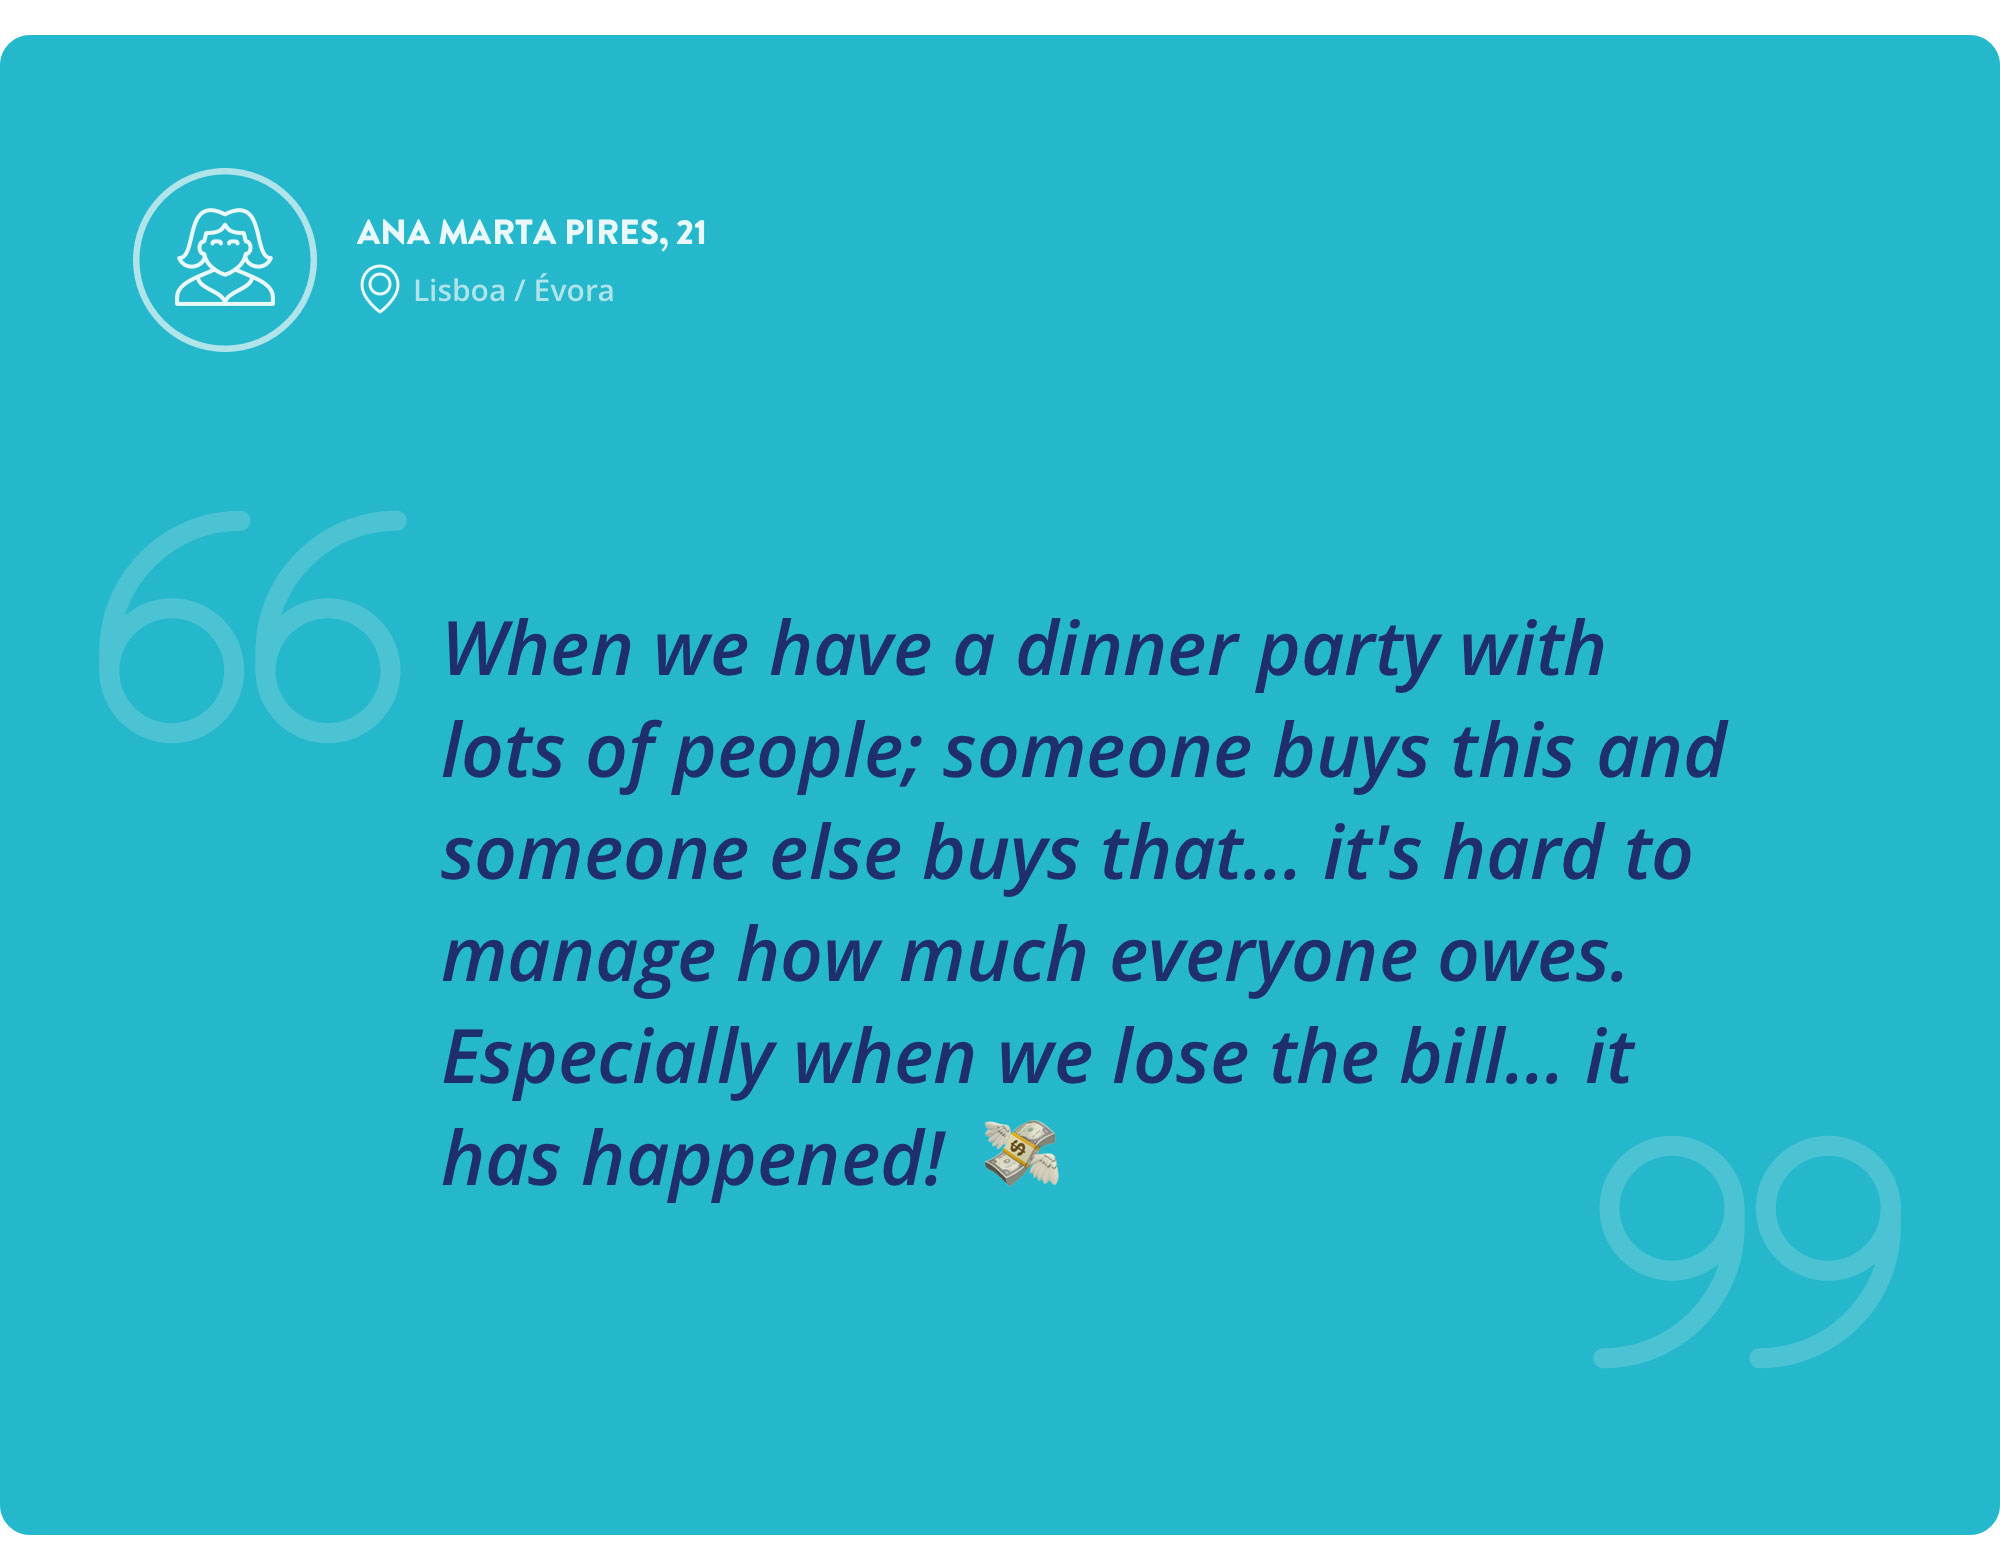 Interview quote by Ana Marta Pires, 21 years old — When we have a dinner party with lots of people; someone buys this and someone else buys that... it's hard to manage how much everyone owes. Especially when we lose the bill... it has happened!